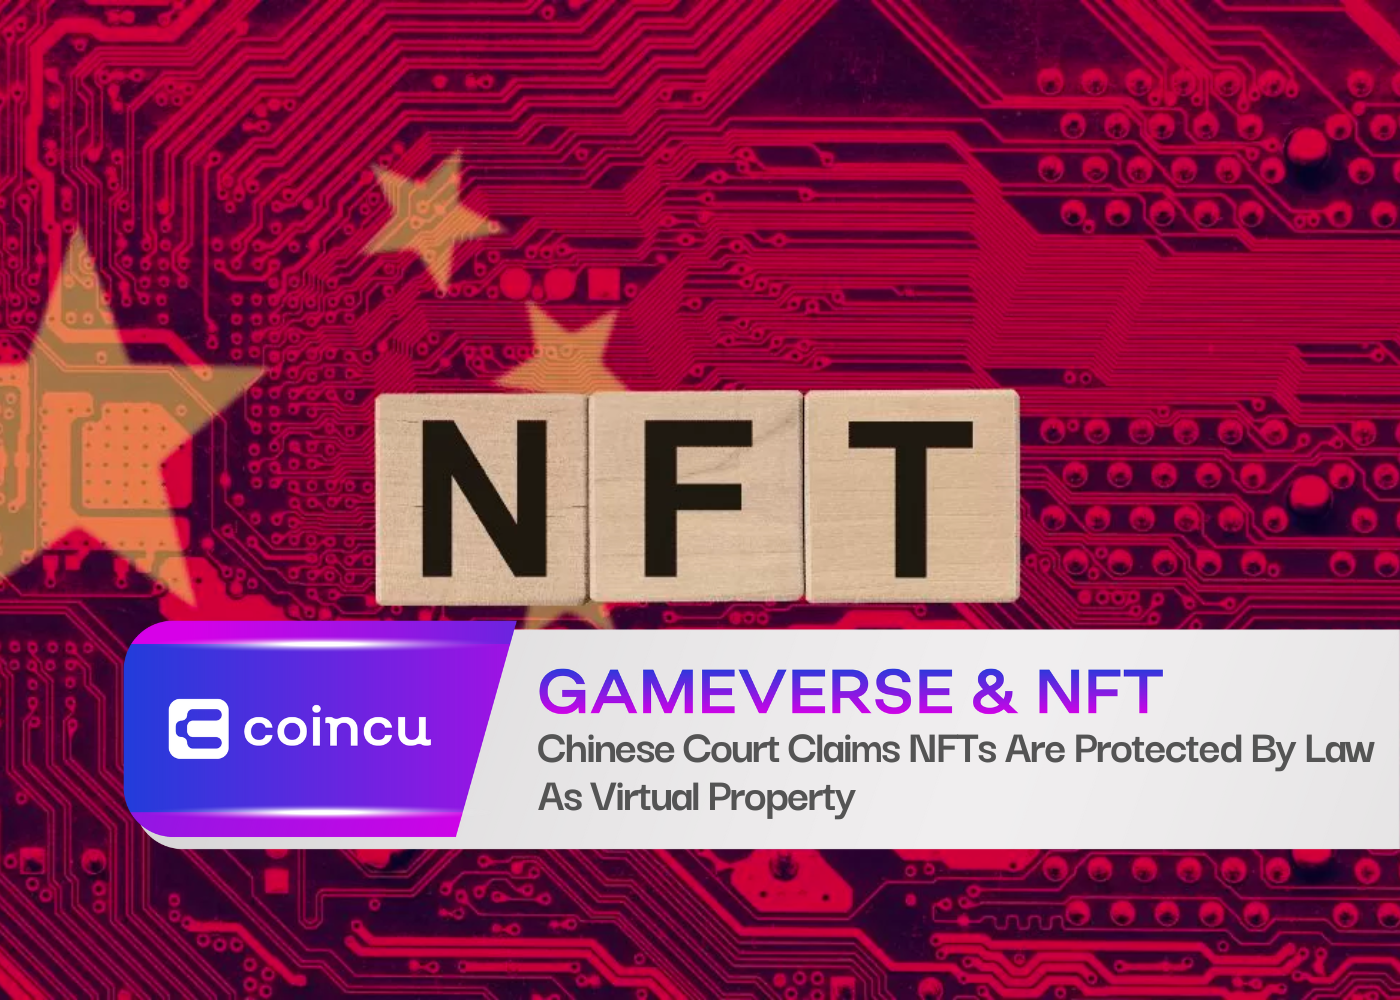 Chinese Court Claims NFTs Are Protected By Law As Virtual Property